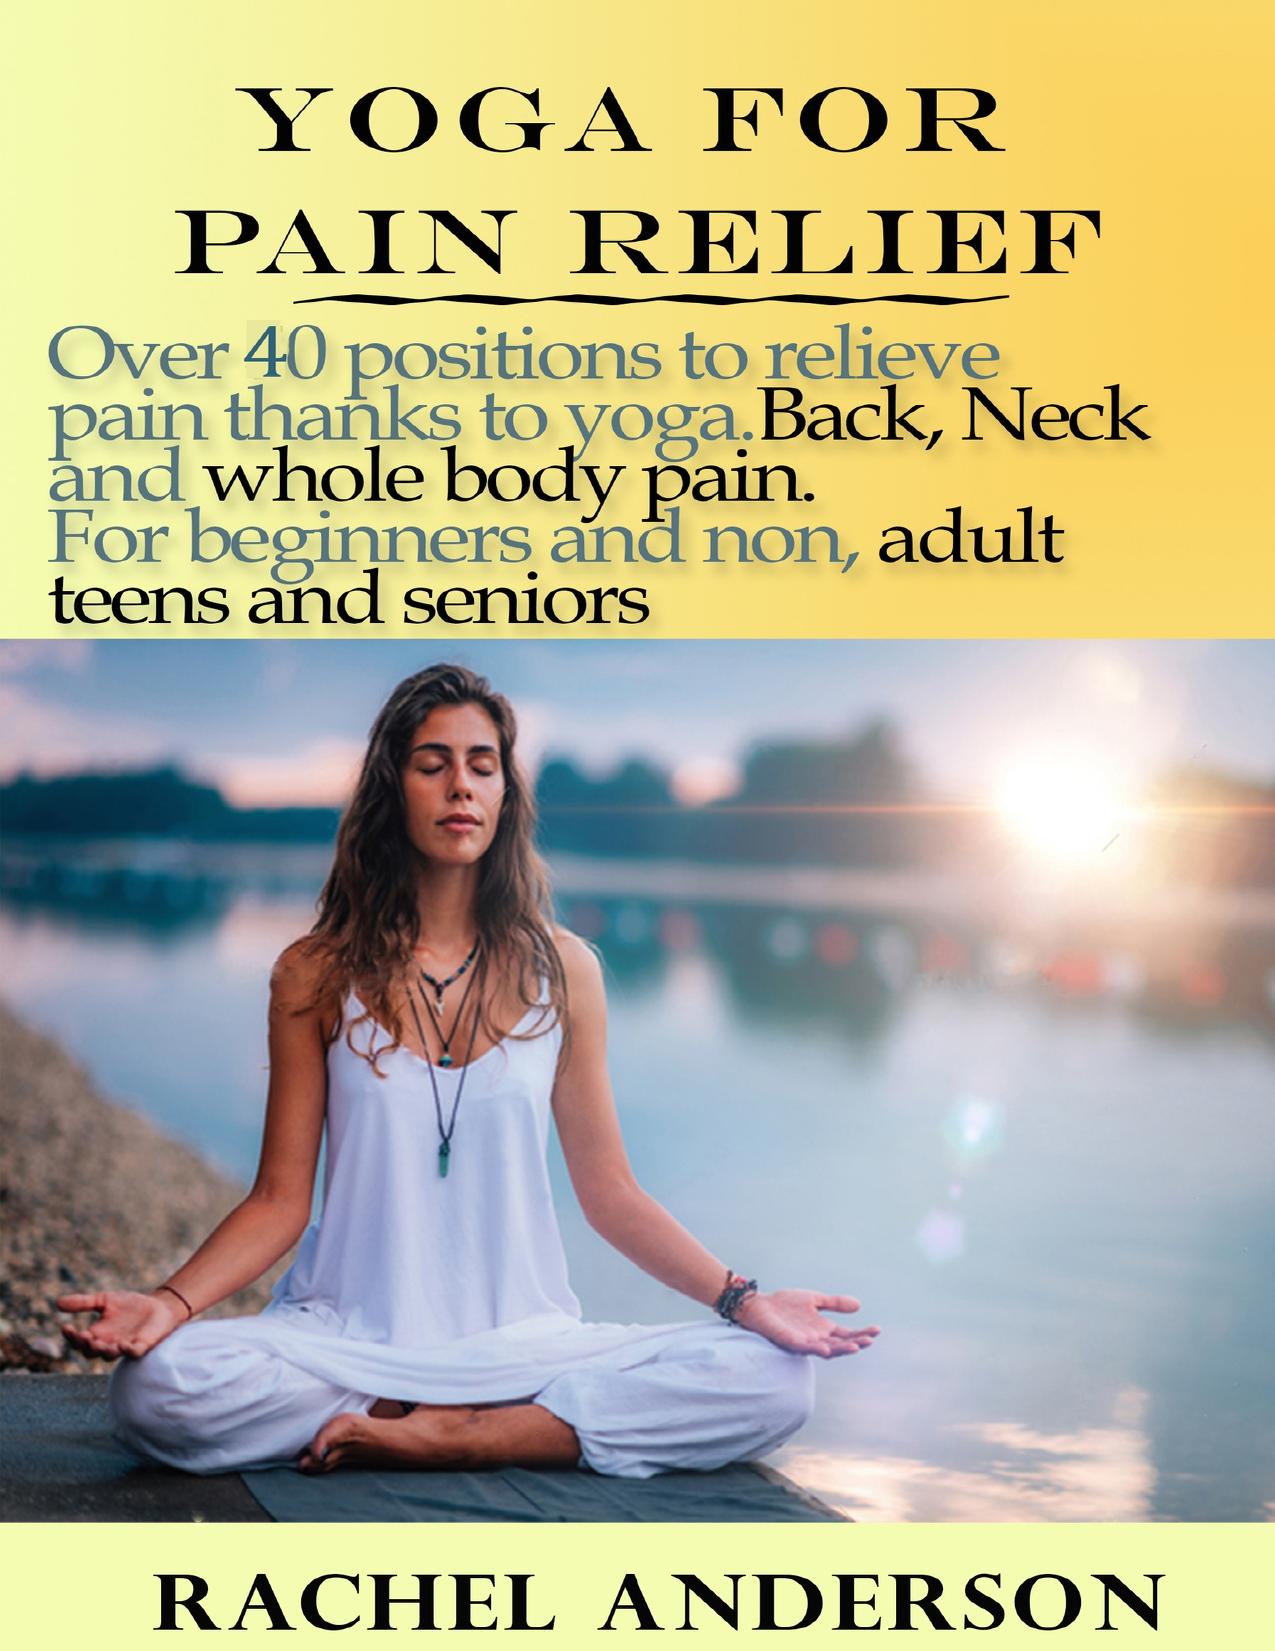 YOGA FOR PAIN RELIEF: Over 40 positions to relieve pain thanks to yoga. Back, Neck and whole body pain. For beginners and non, adult teens and seniors by Anderson Rachel